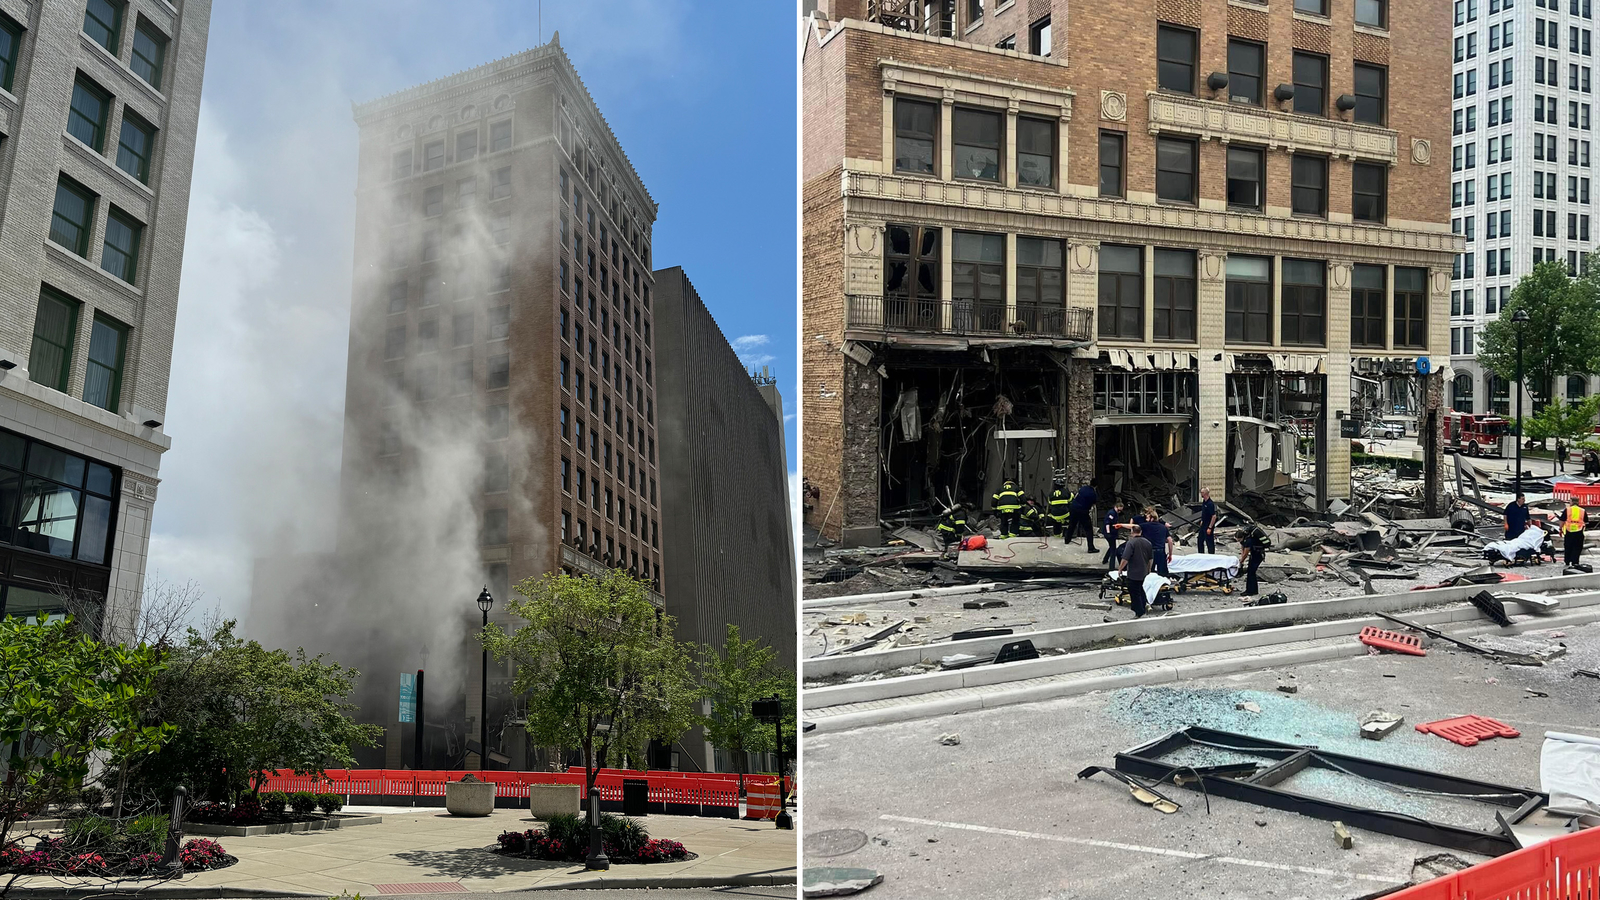 1 killed, 7 injured after explosion at Chase bank in downtown Youngstown, Ohio [Video]